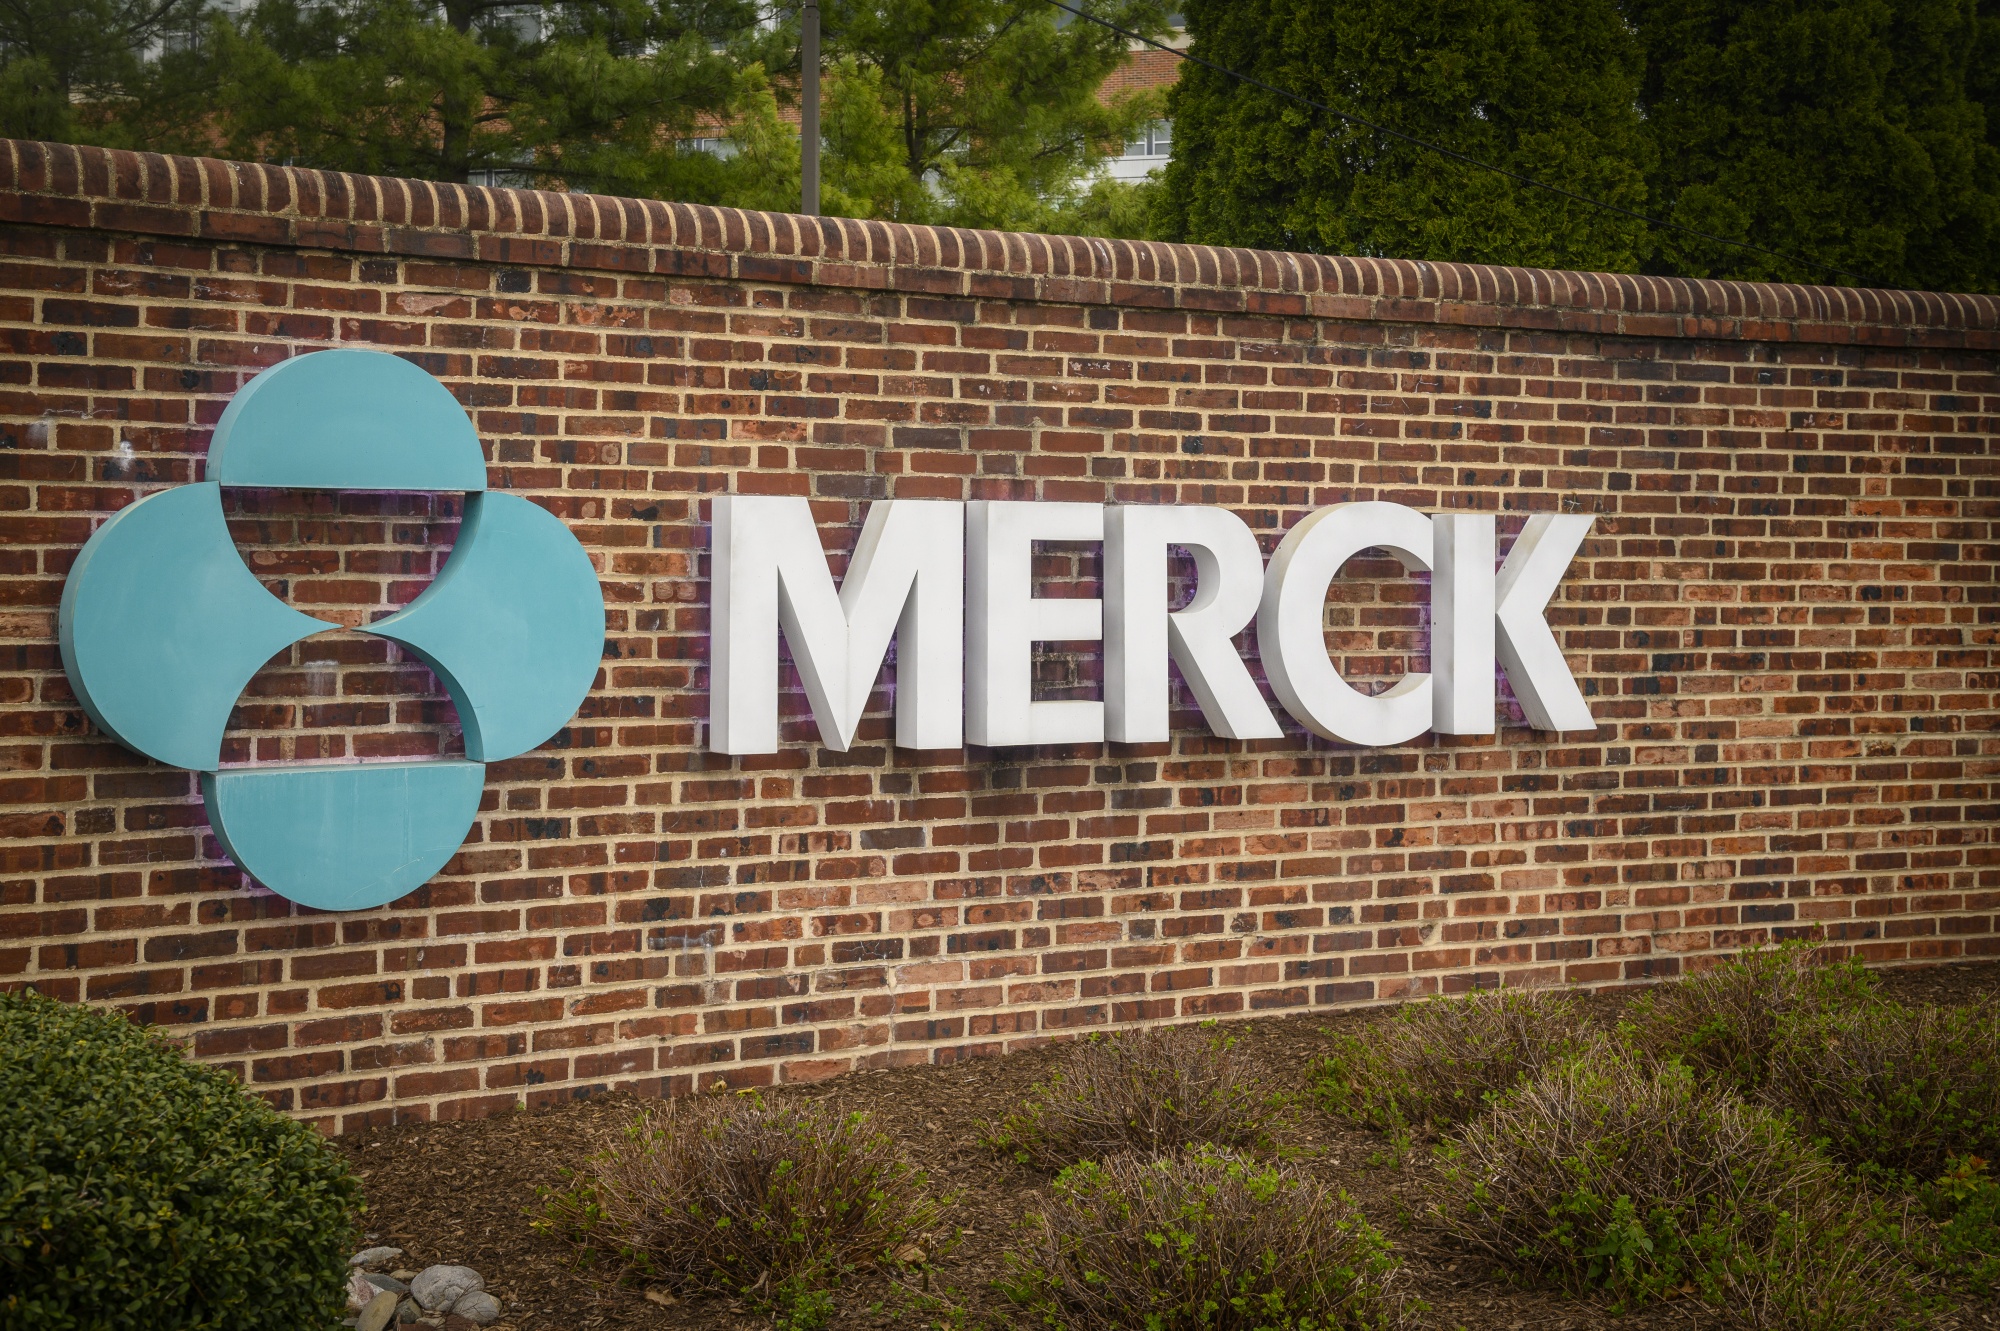 The Merck headquarters in Rahway, New Jersey, US.